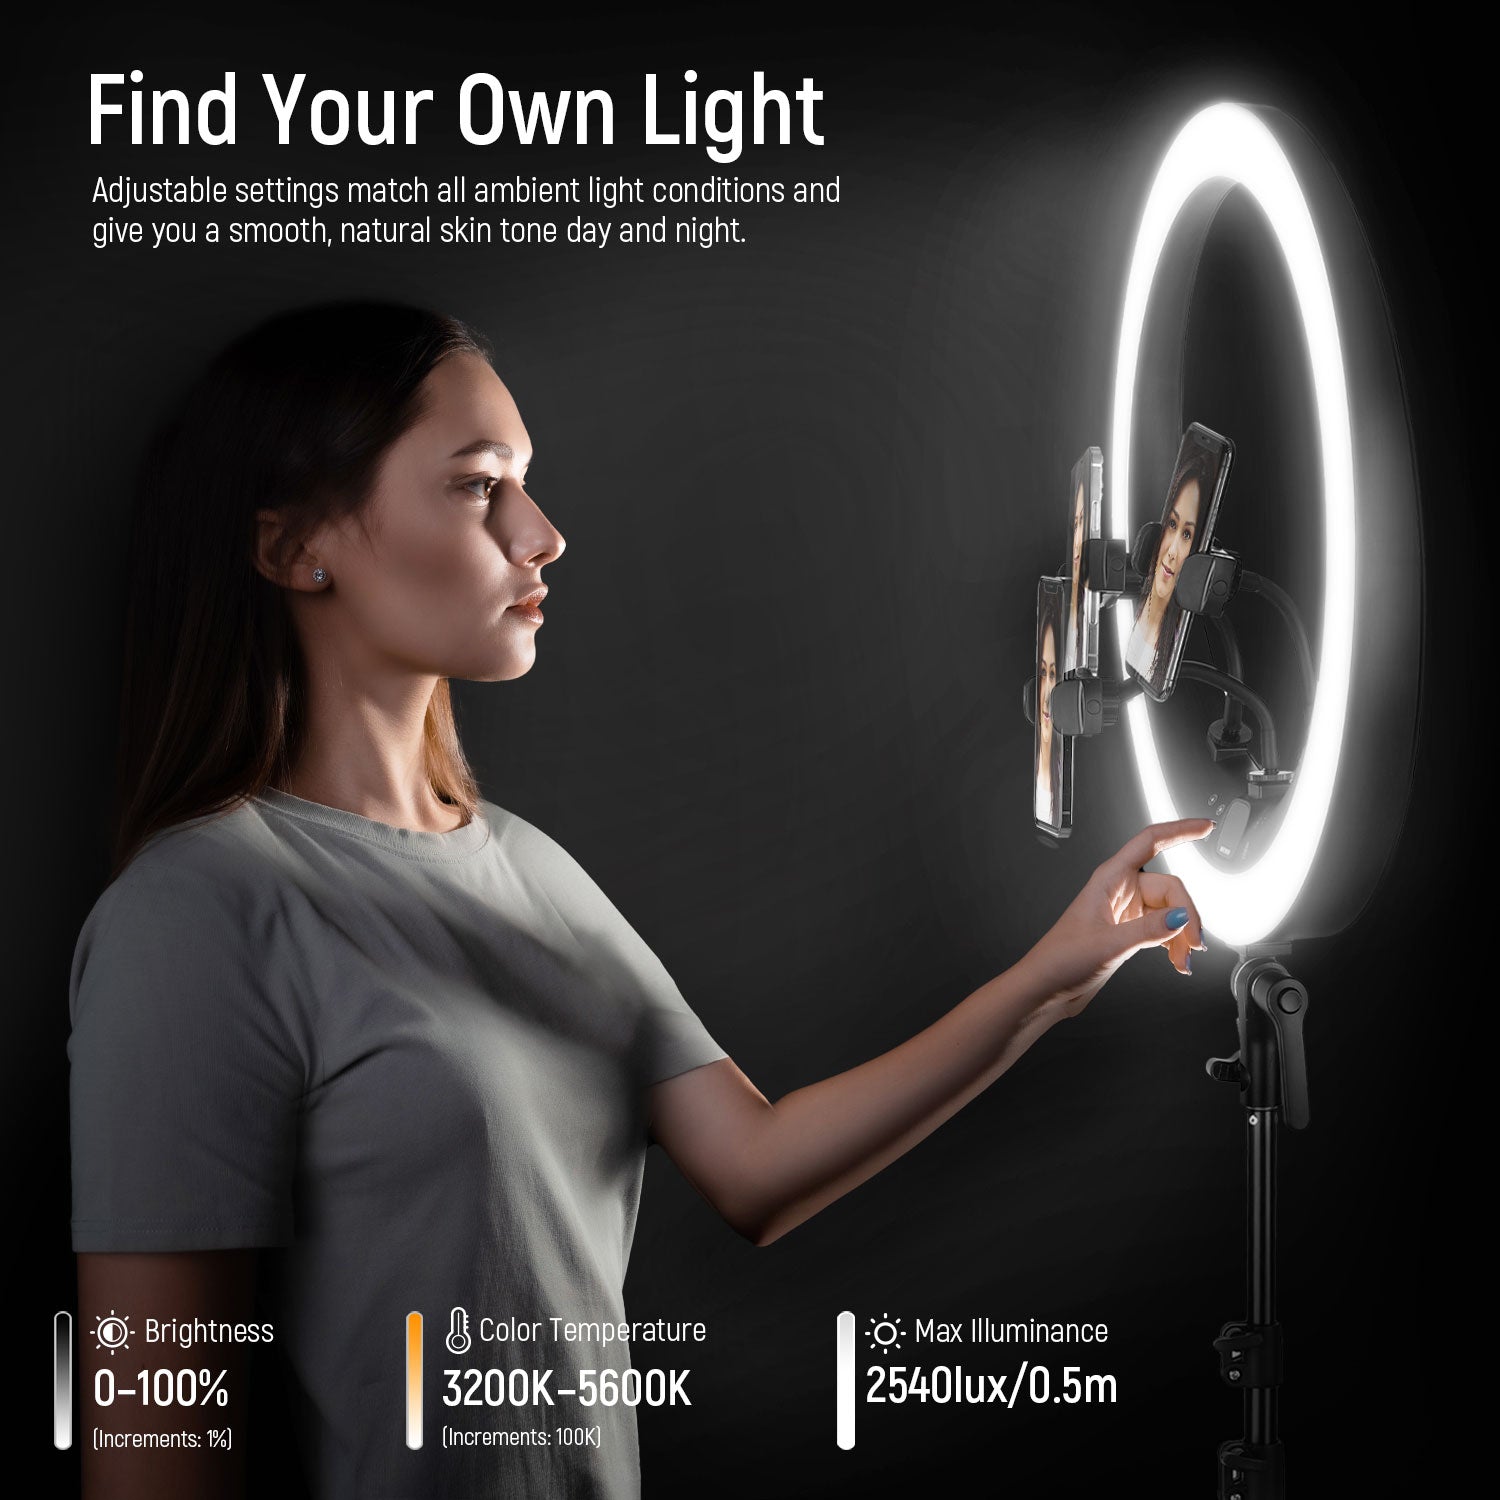 Neewer 18/48cm LED Ring Light: 52W Dimmable LED Ringlight Makeup Selfie  Light Ring with Stand/Soft Tube/Phone Holder/Filter for Camera Phone